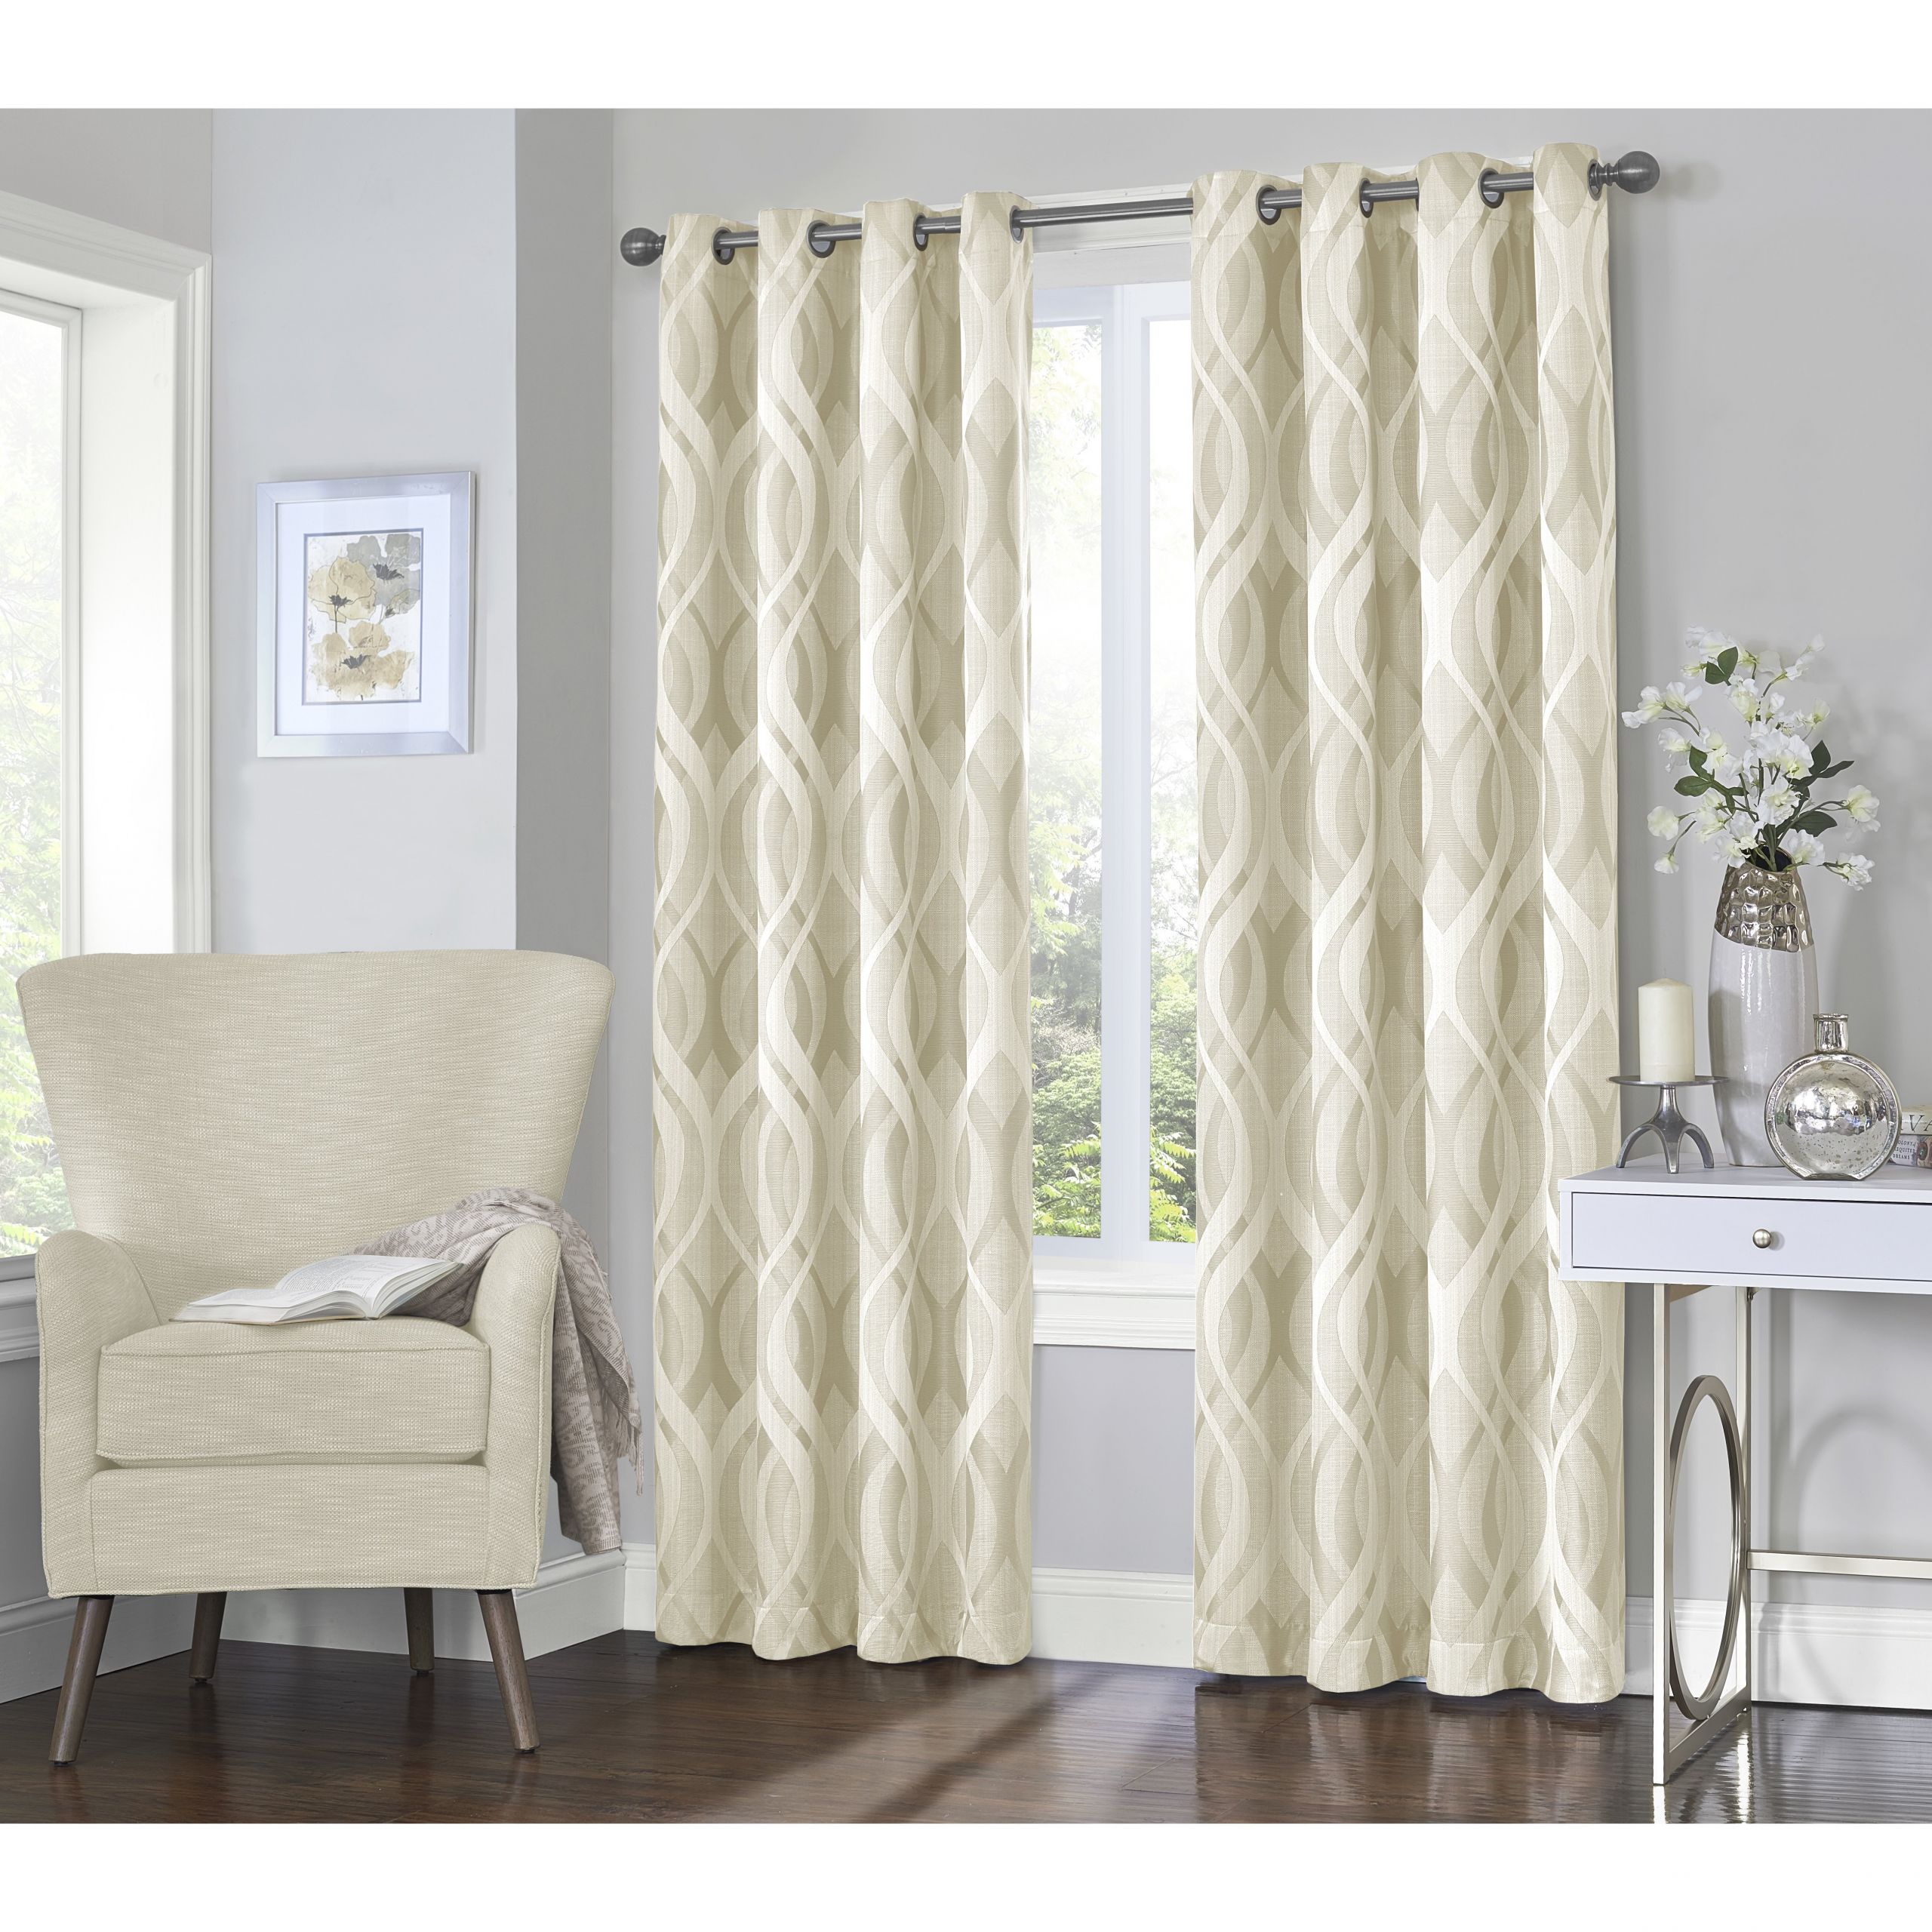 Walmart Curtains For Living Room
 Decorating Gorgeous Walmart Curtains And Drapes For